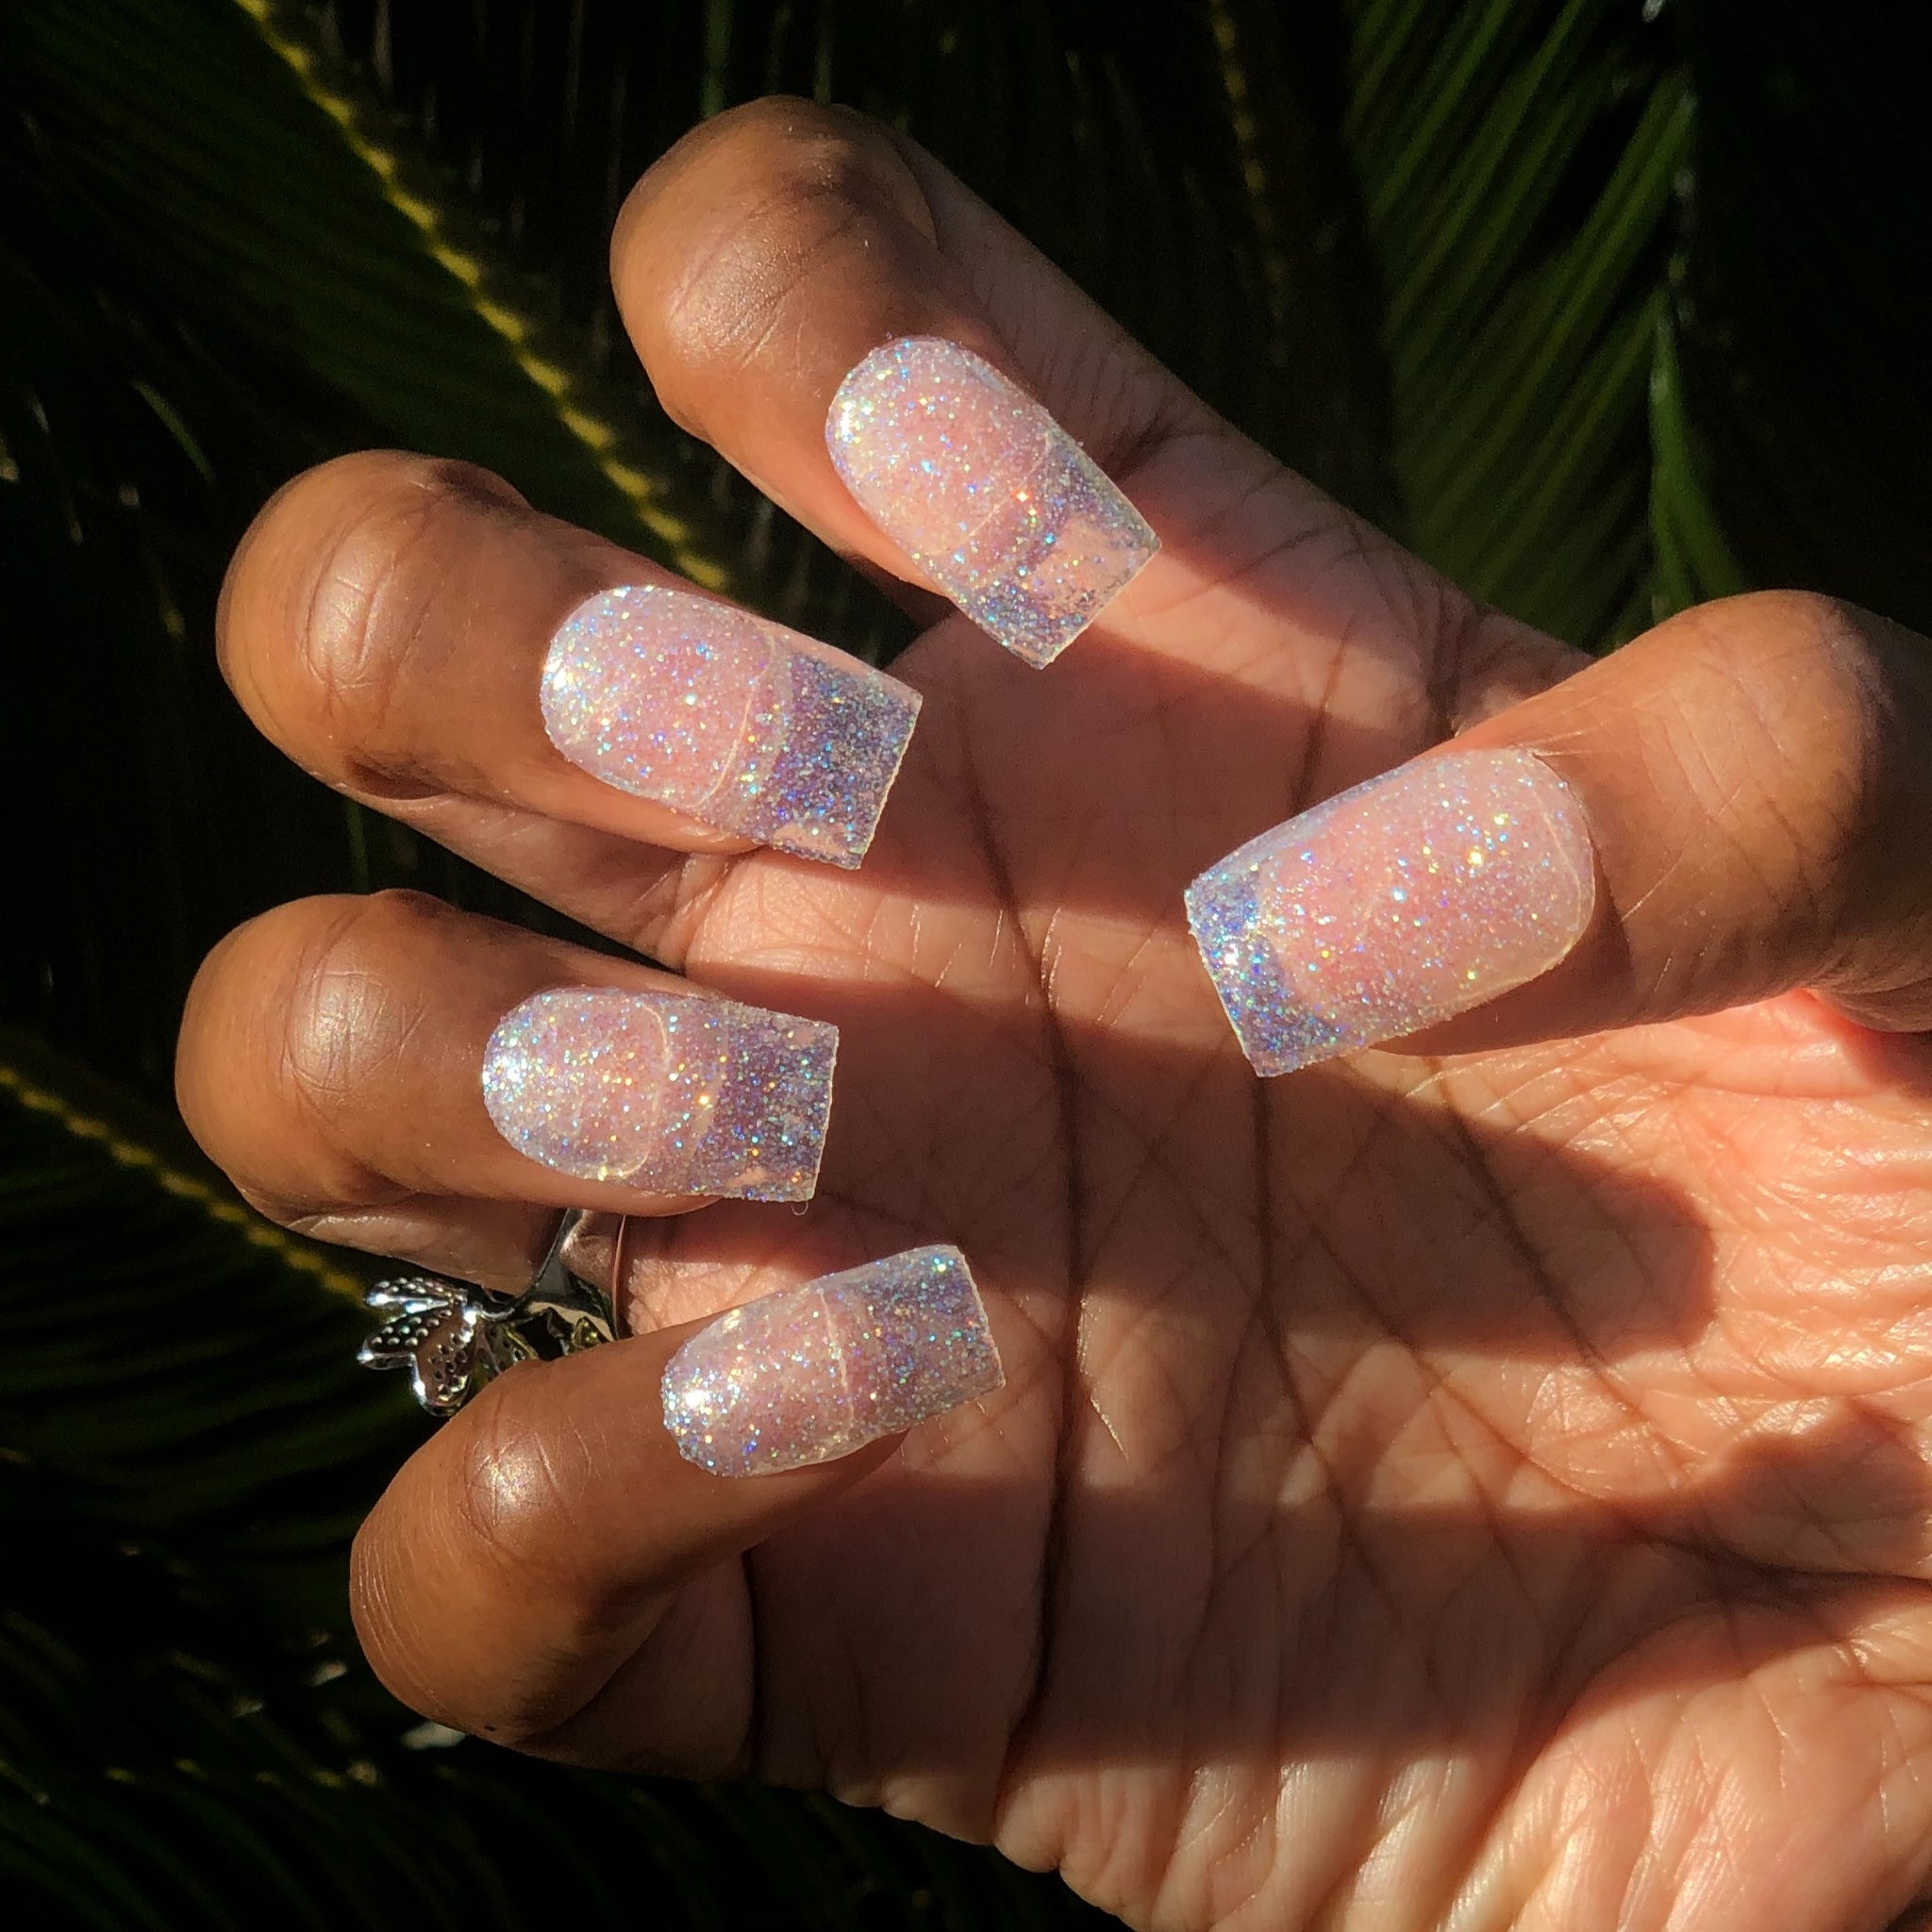 Manicure hand wearing clear glitter press on nails.